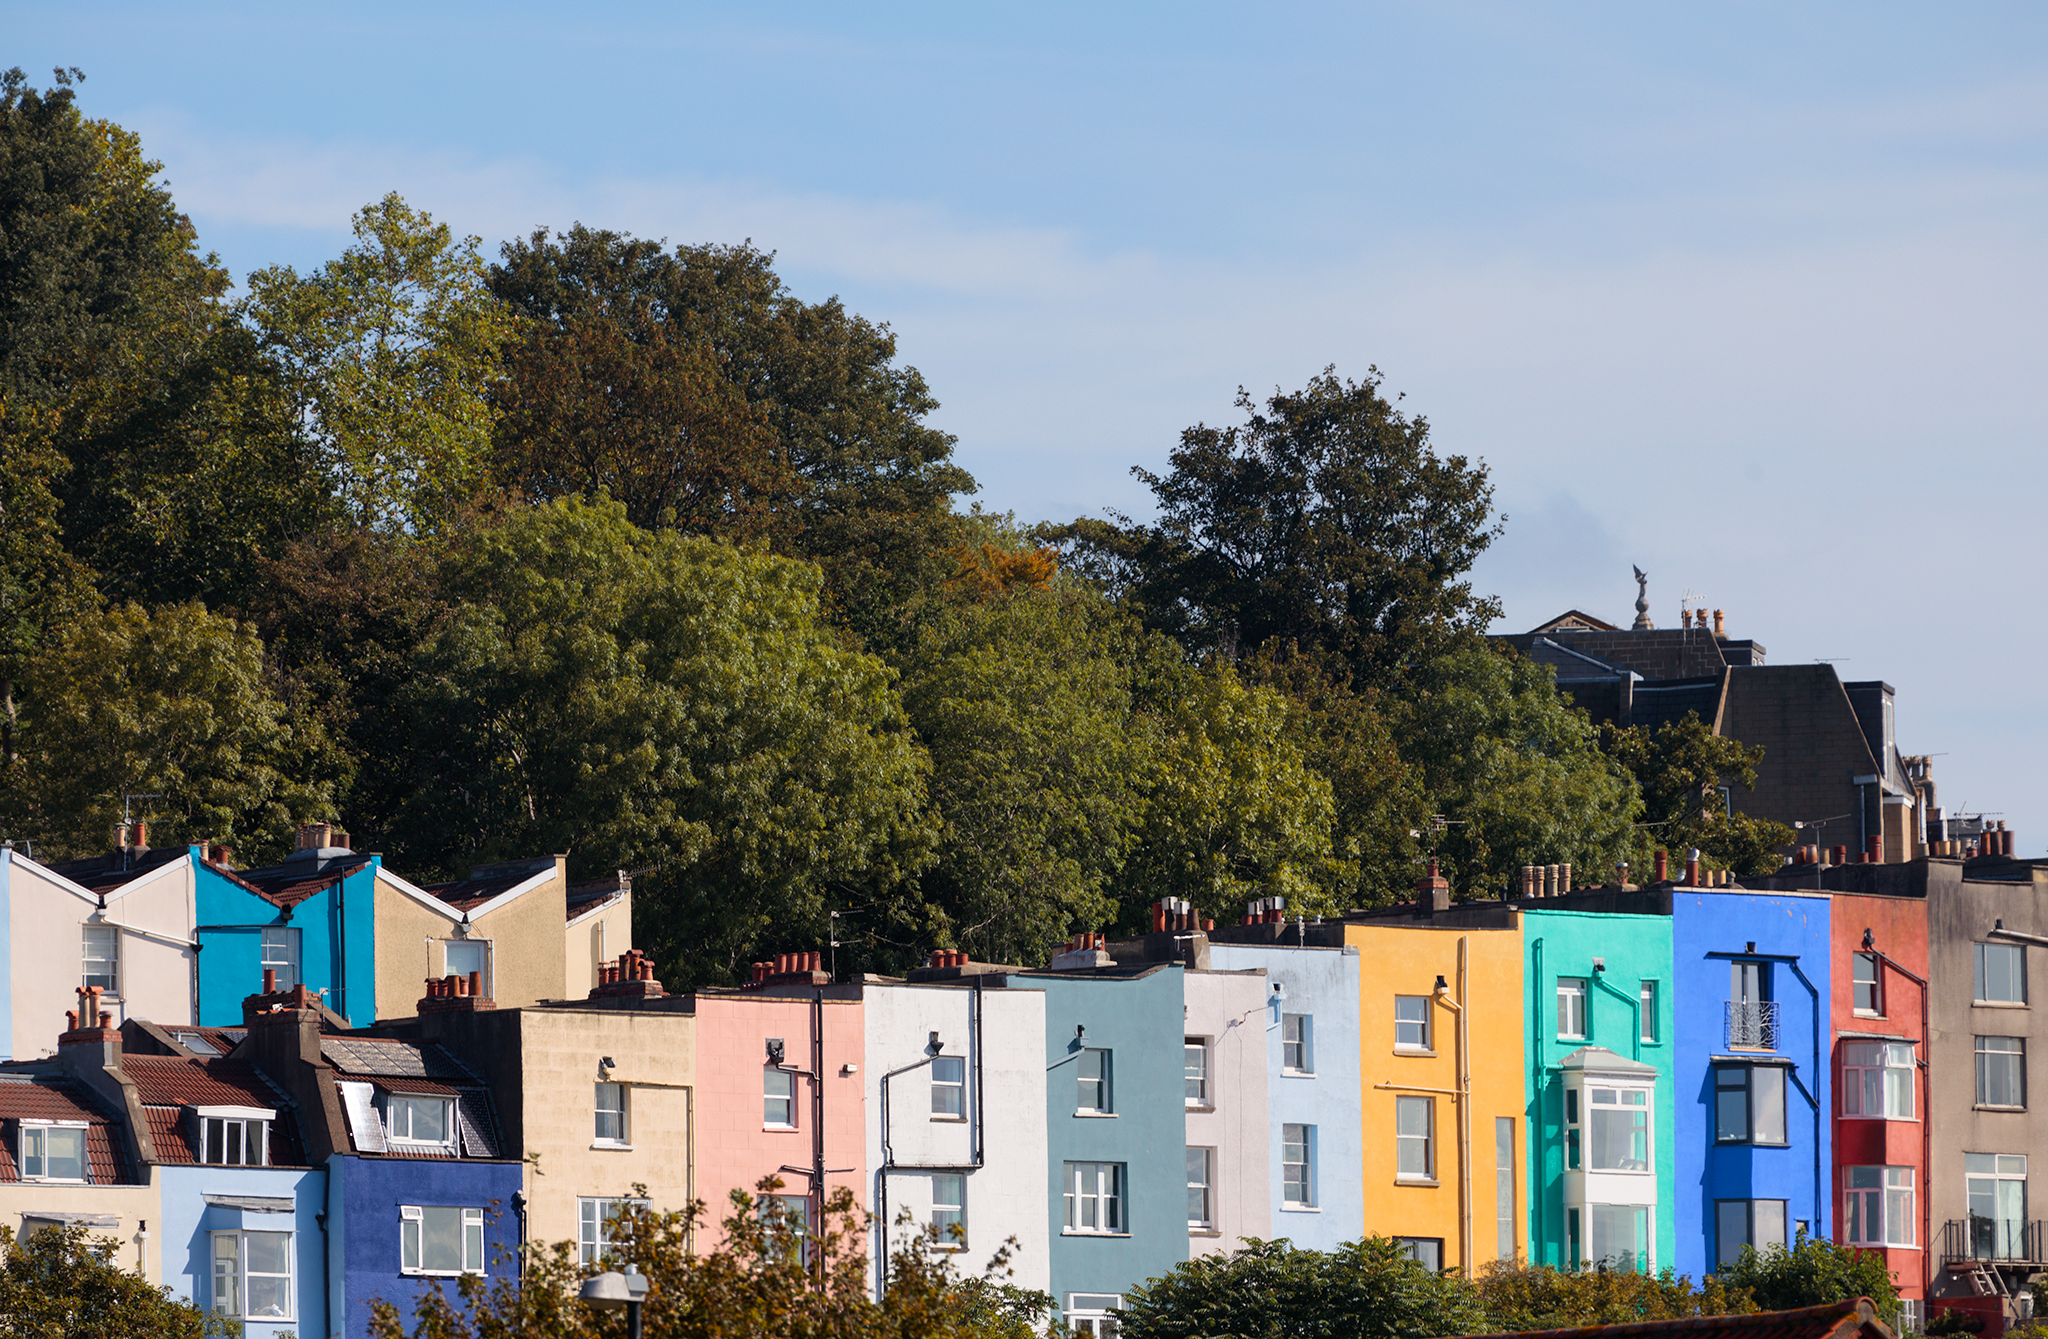 Colourful houses of Bristol